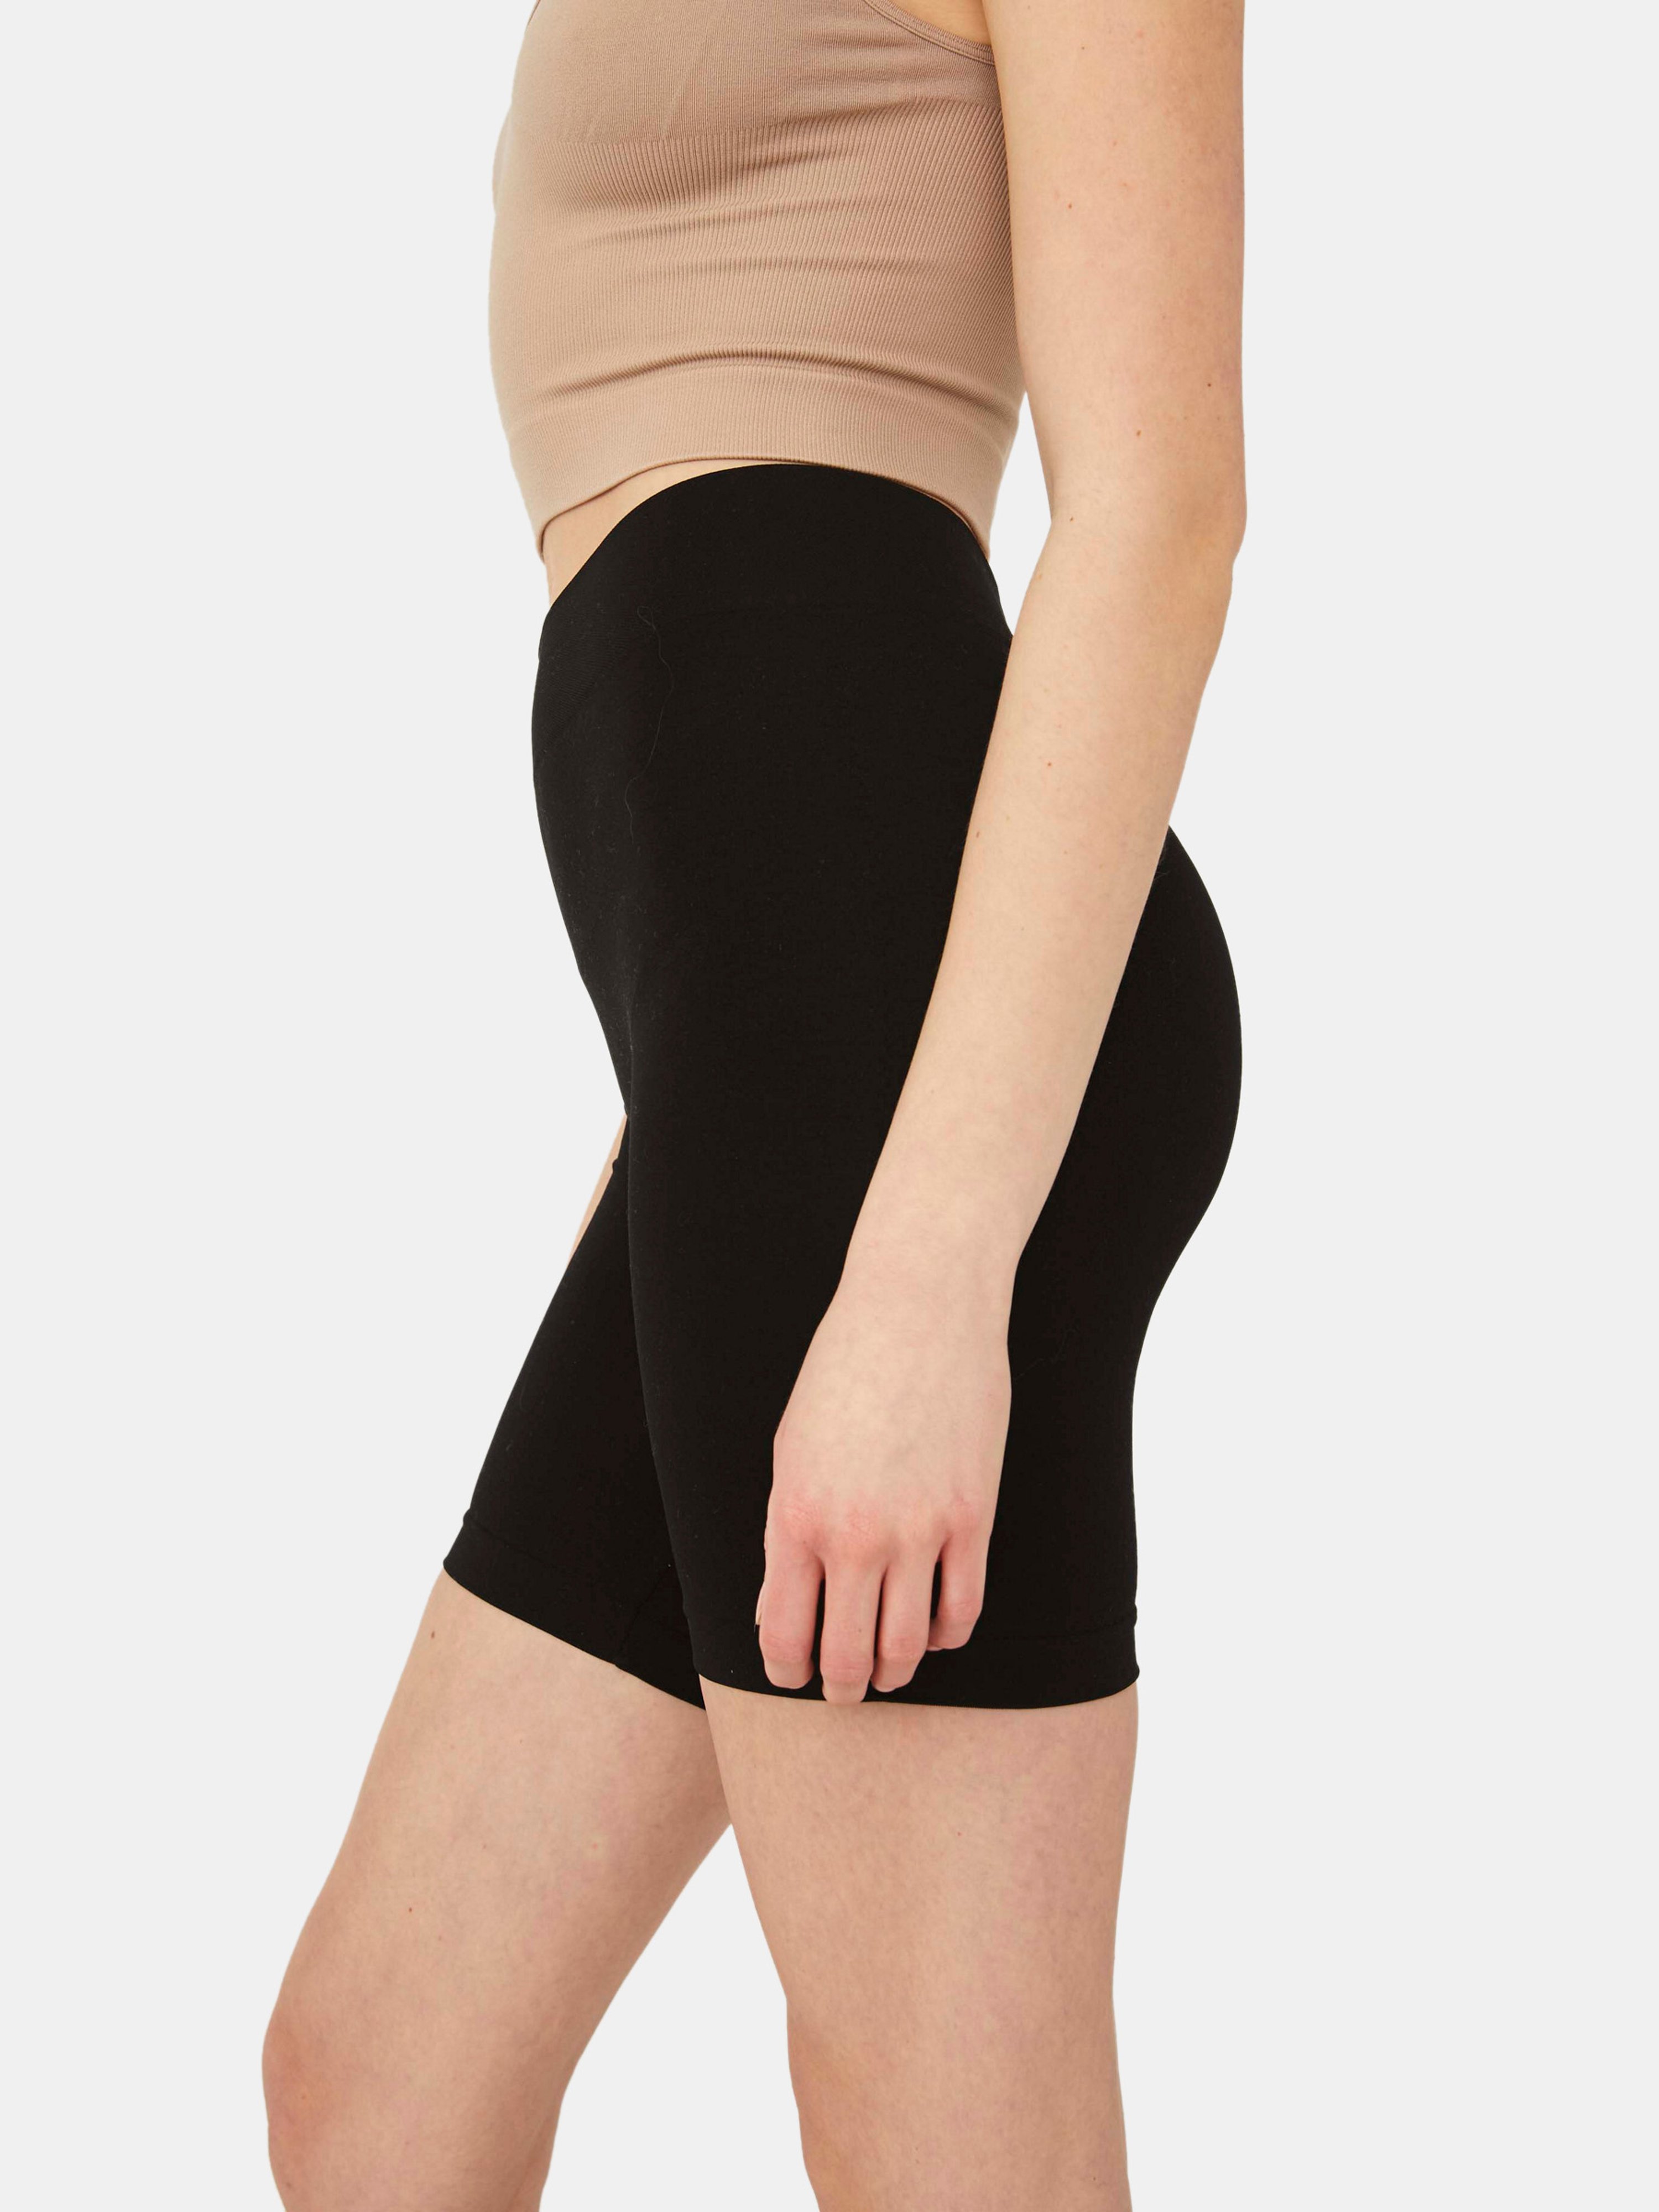 FREE PEOPLE FREE PEOPLE SEAMLESS HIGH RISE SHORTIE